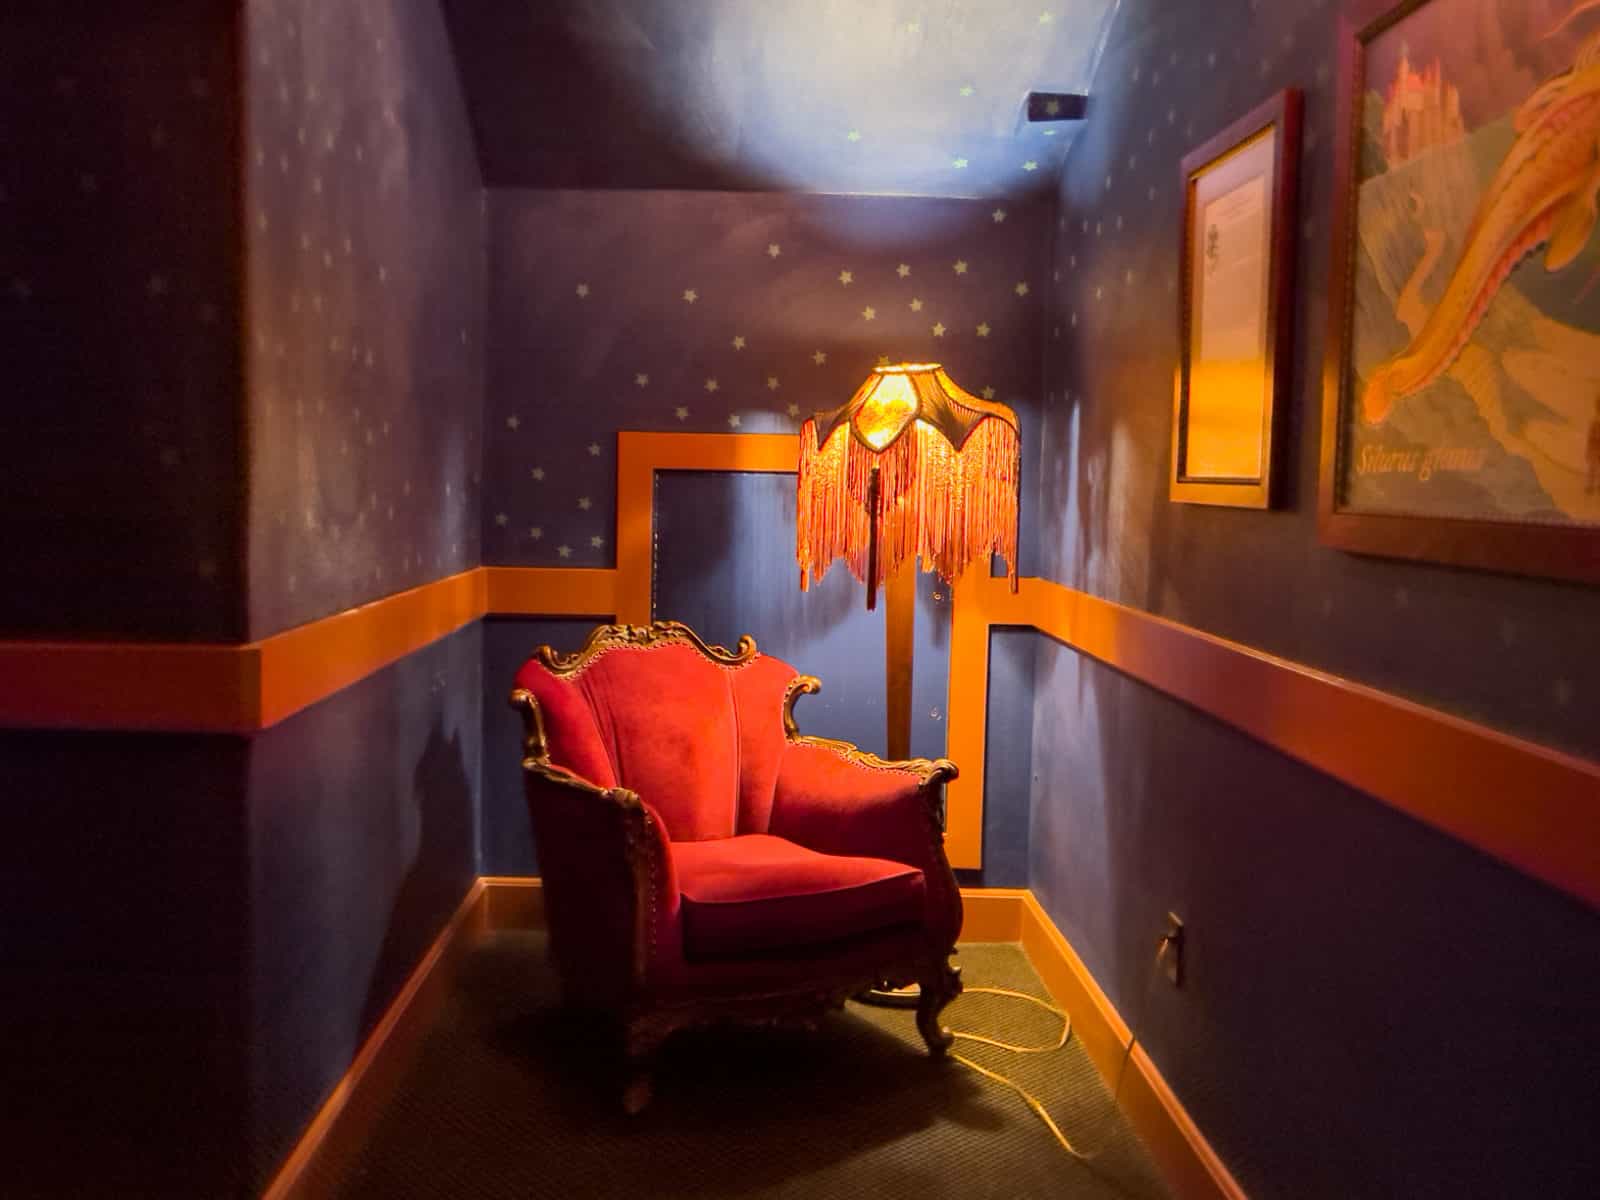 Alcove with stars and a red chair